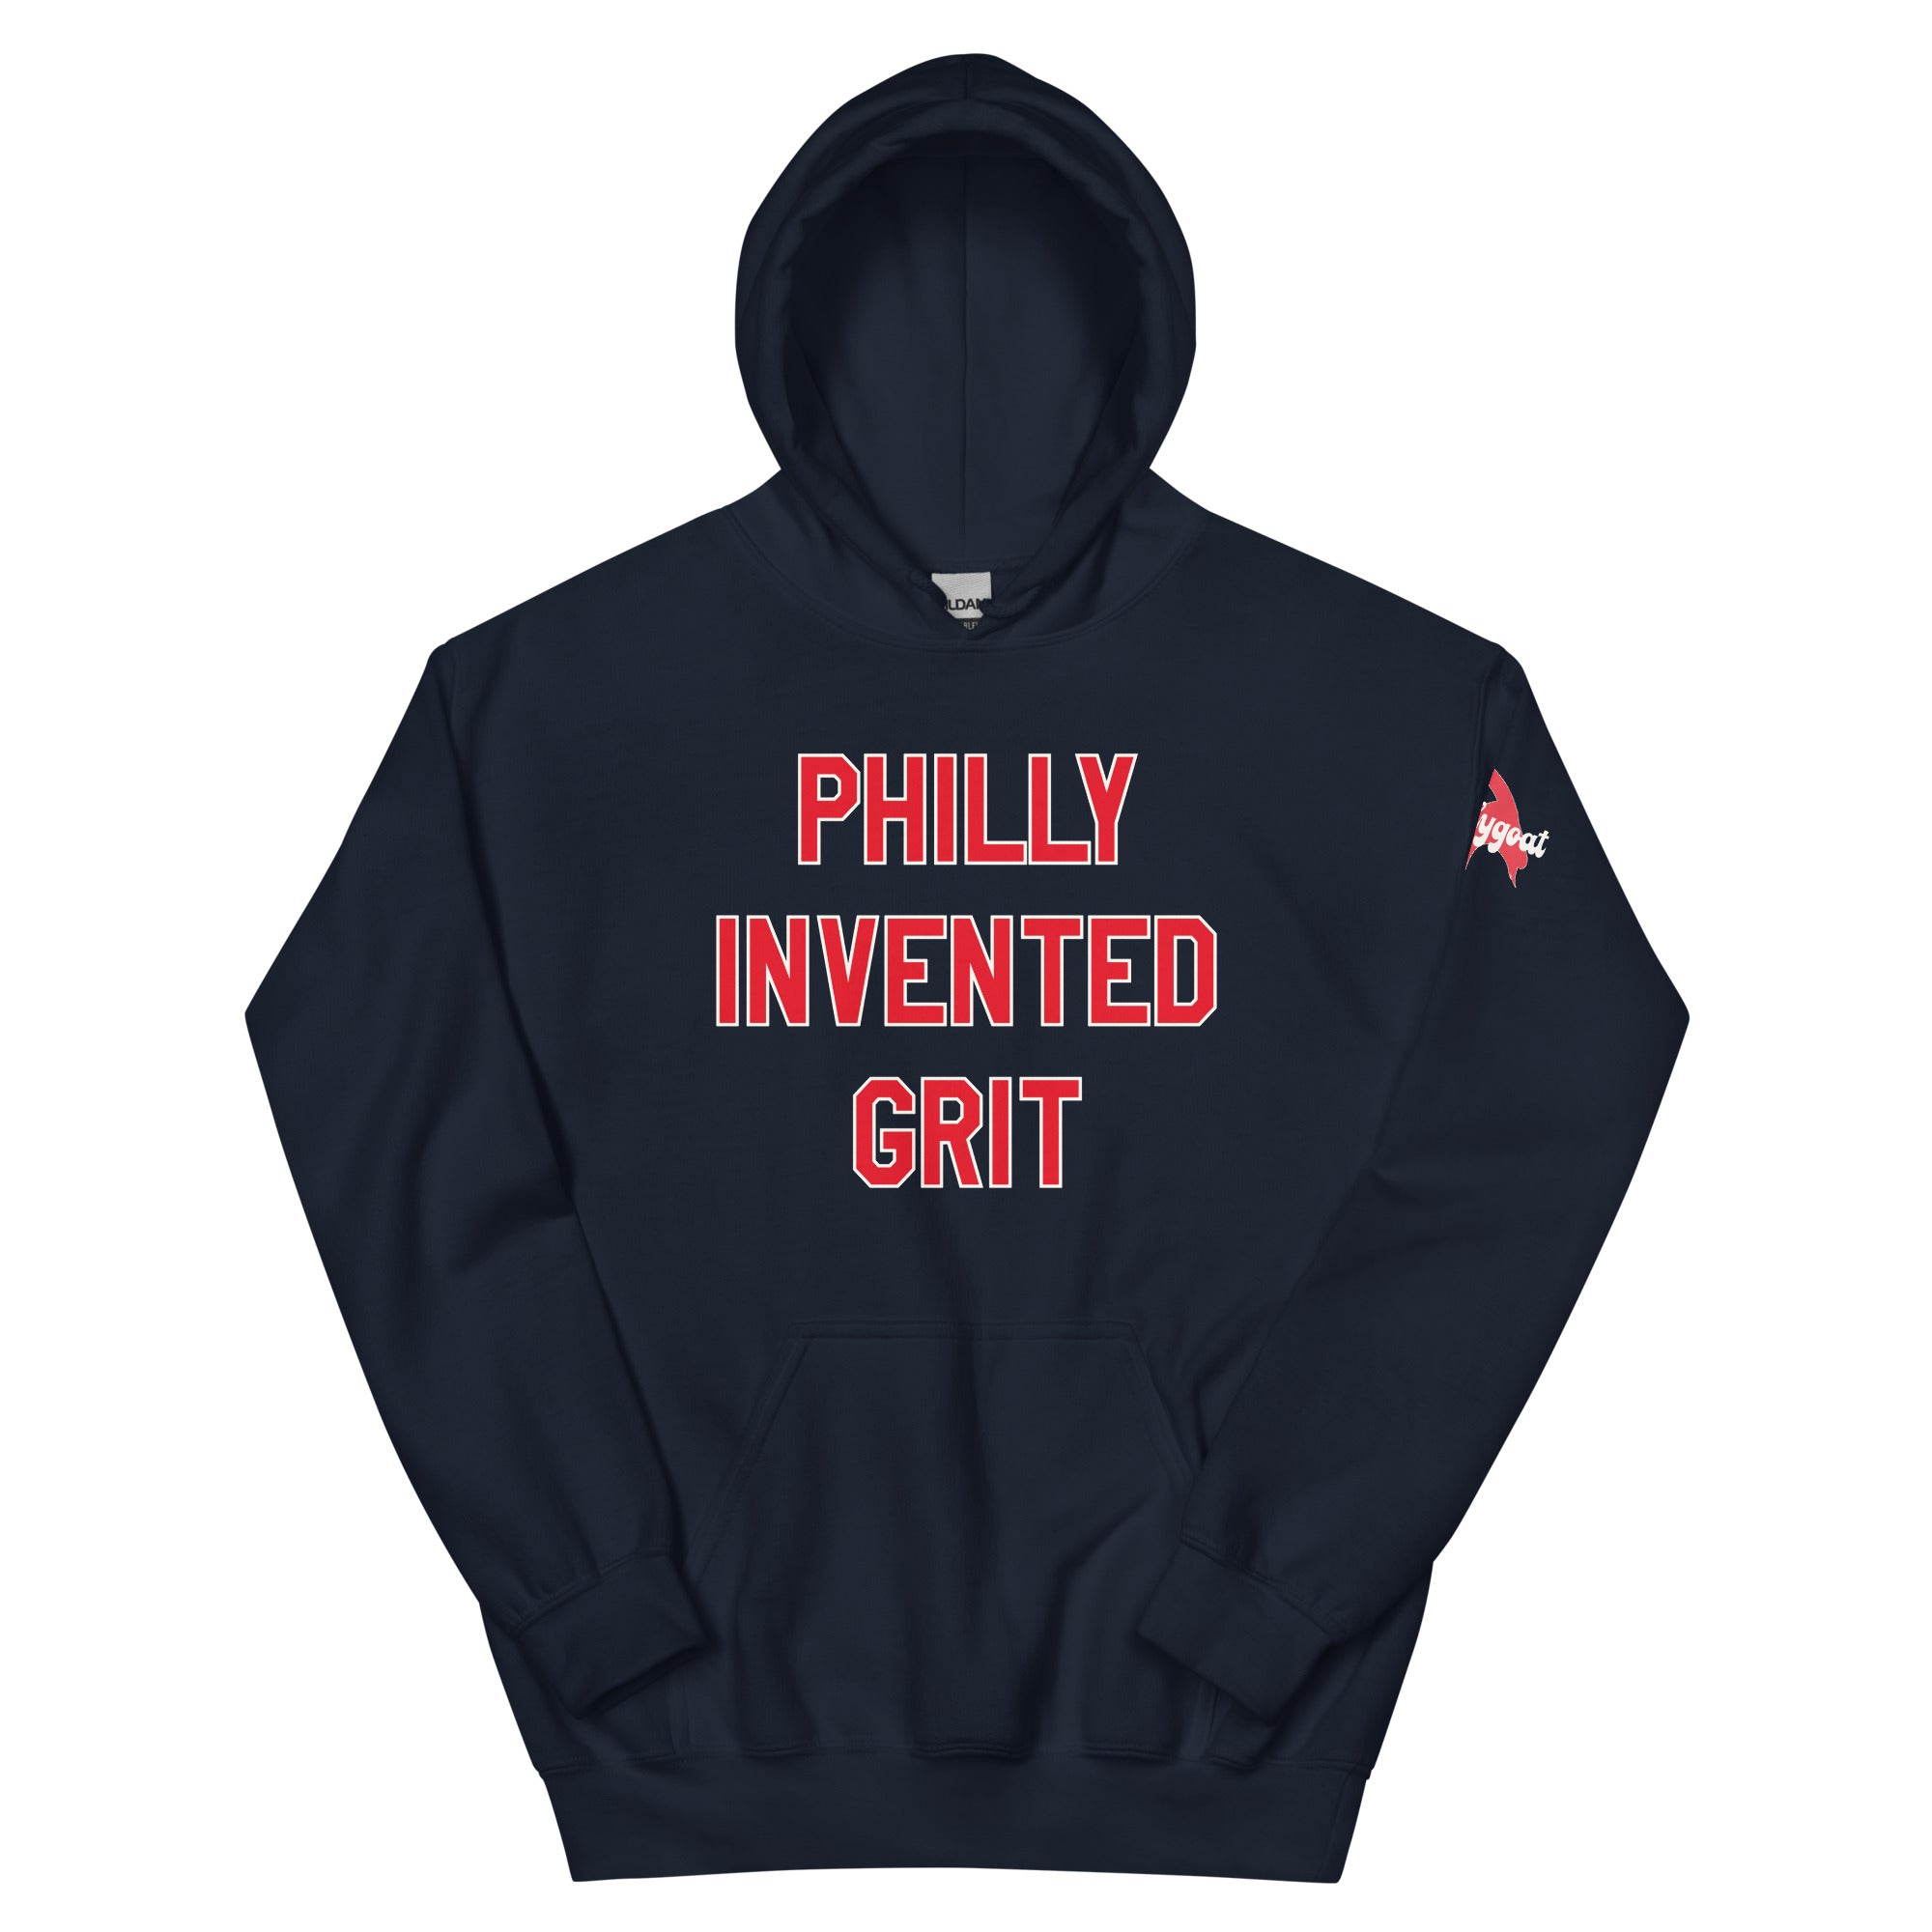 Philadelphia philly invented grit navy hoodie Phillygoat